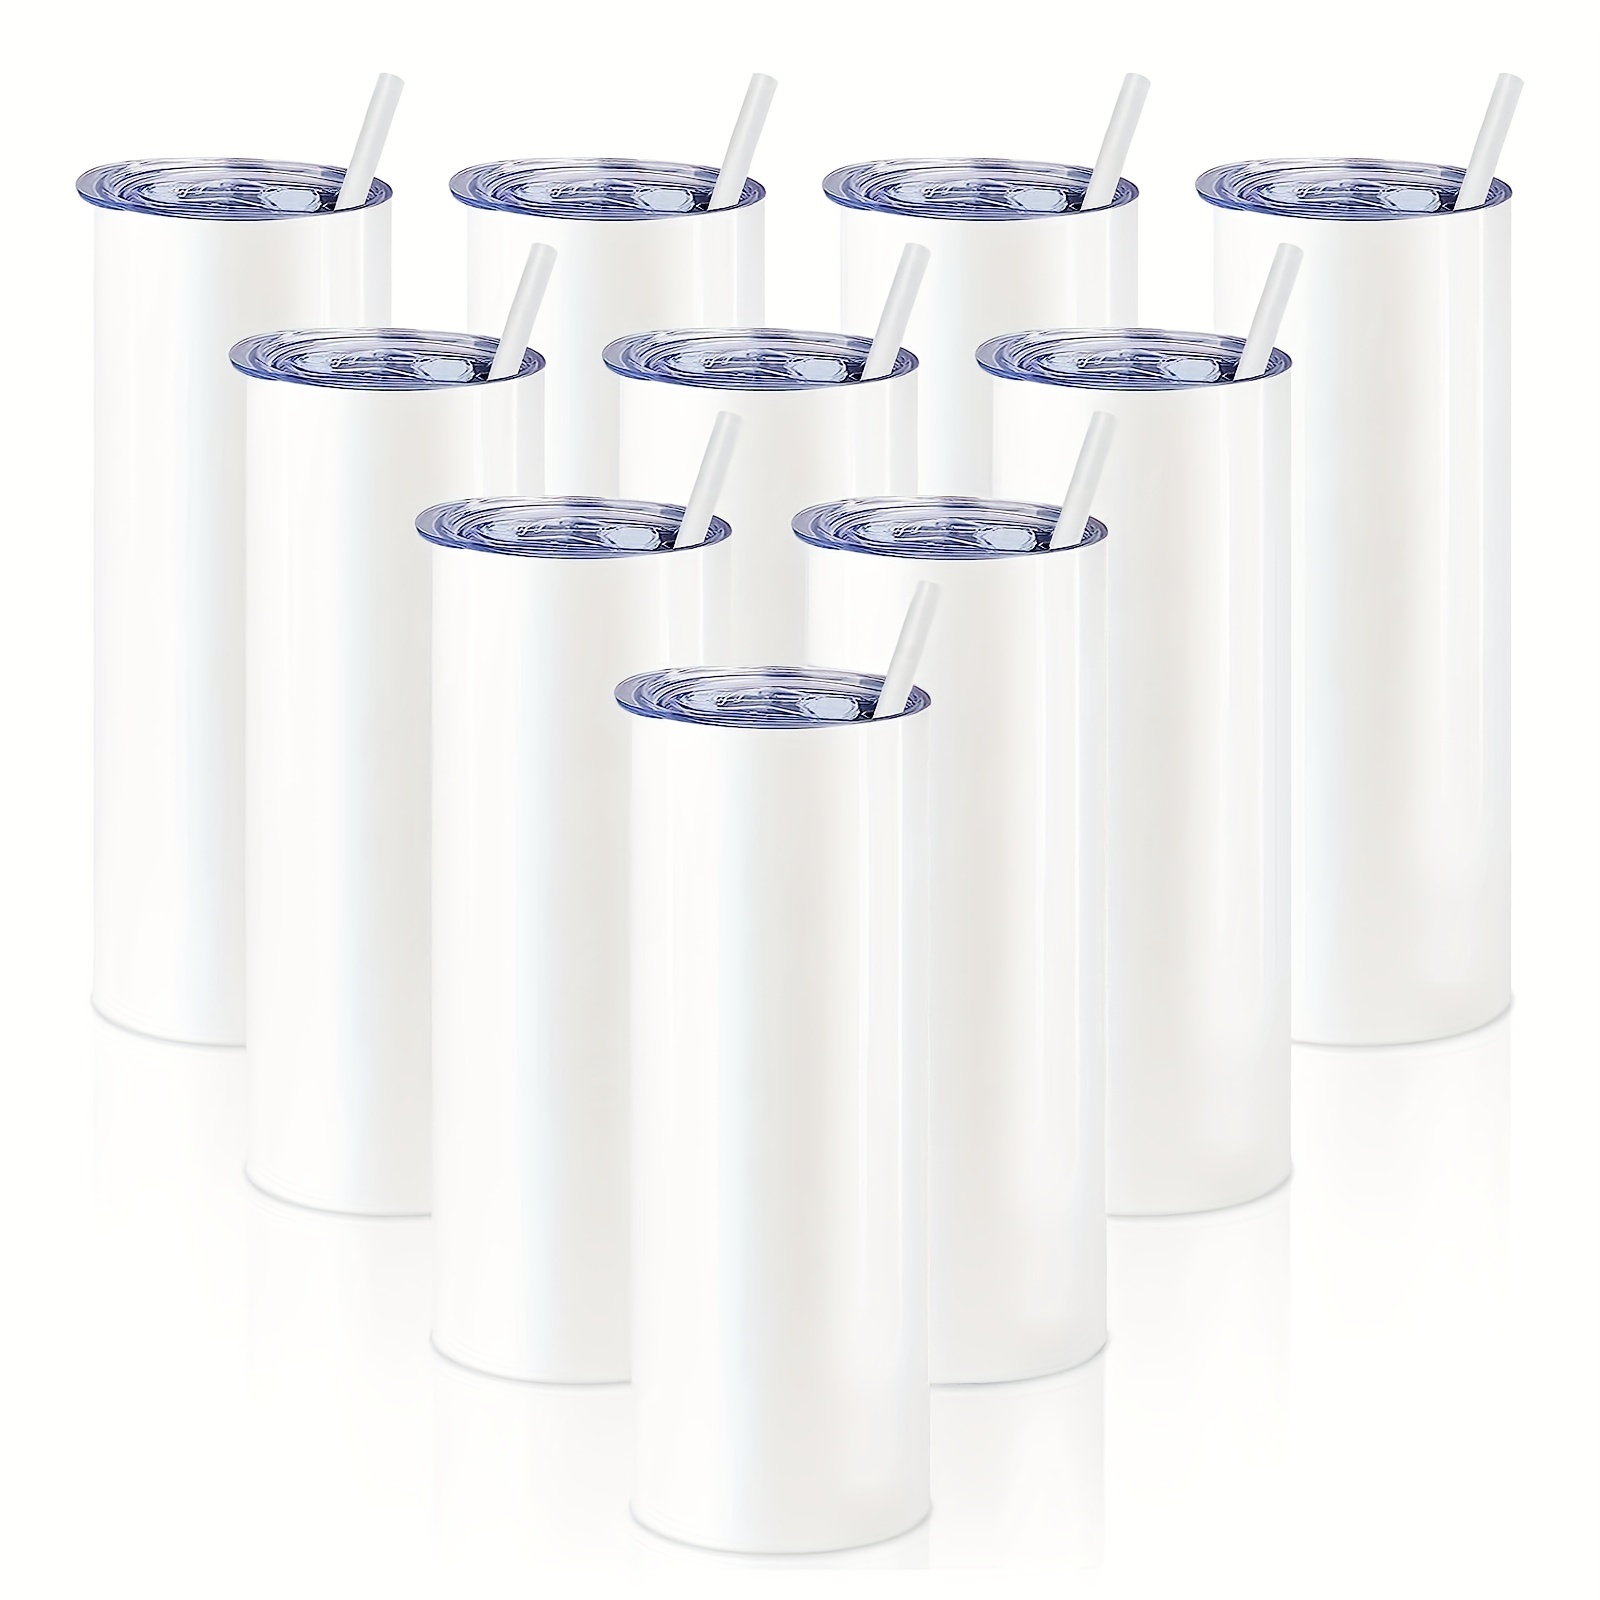 Craft Express 6 Pack 20oz Frosted Glass Sublimation Tumblers